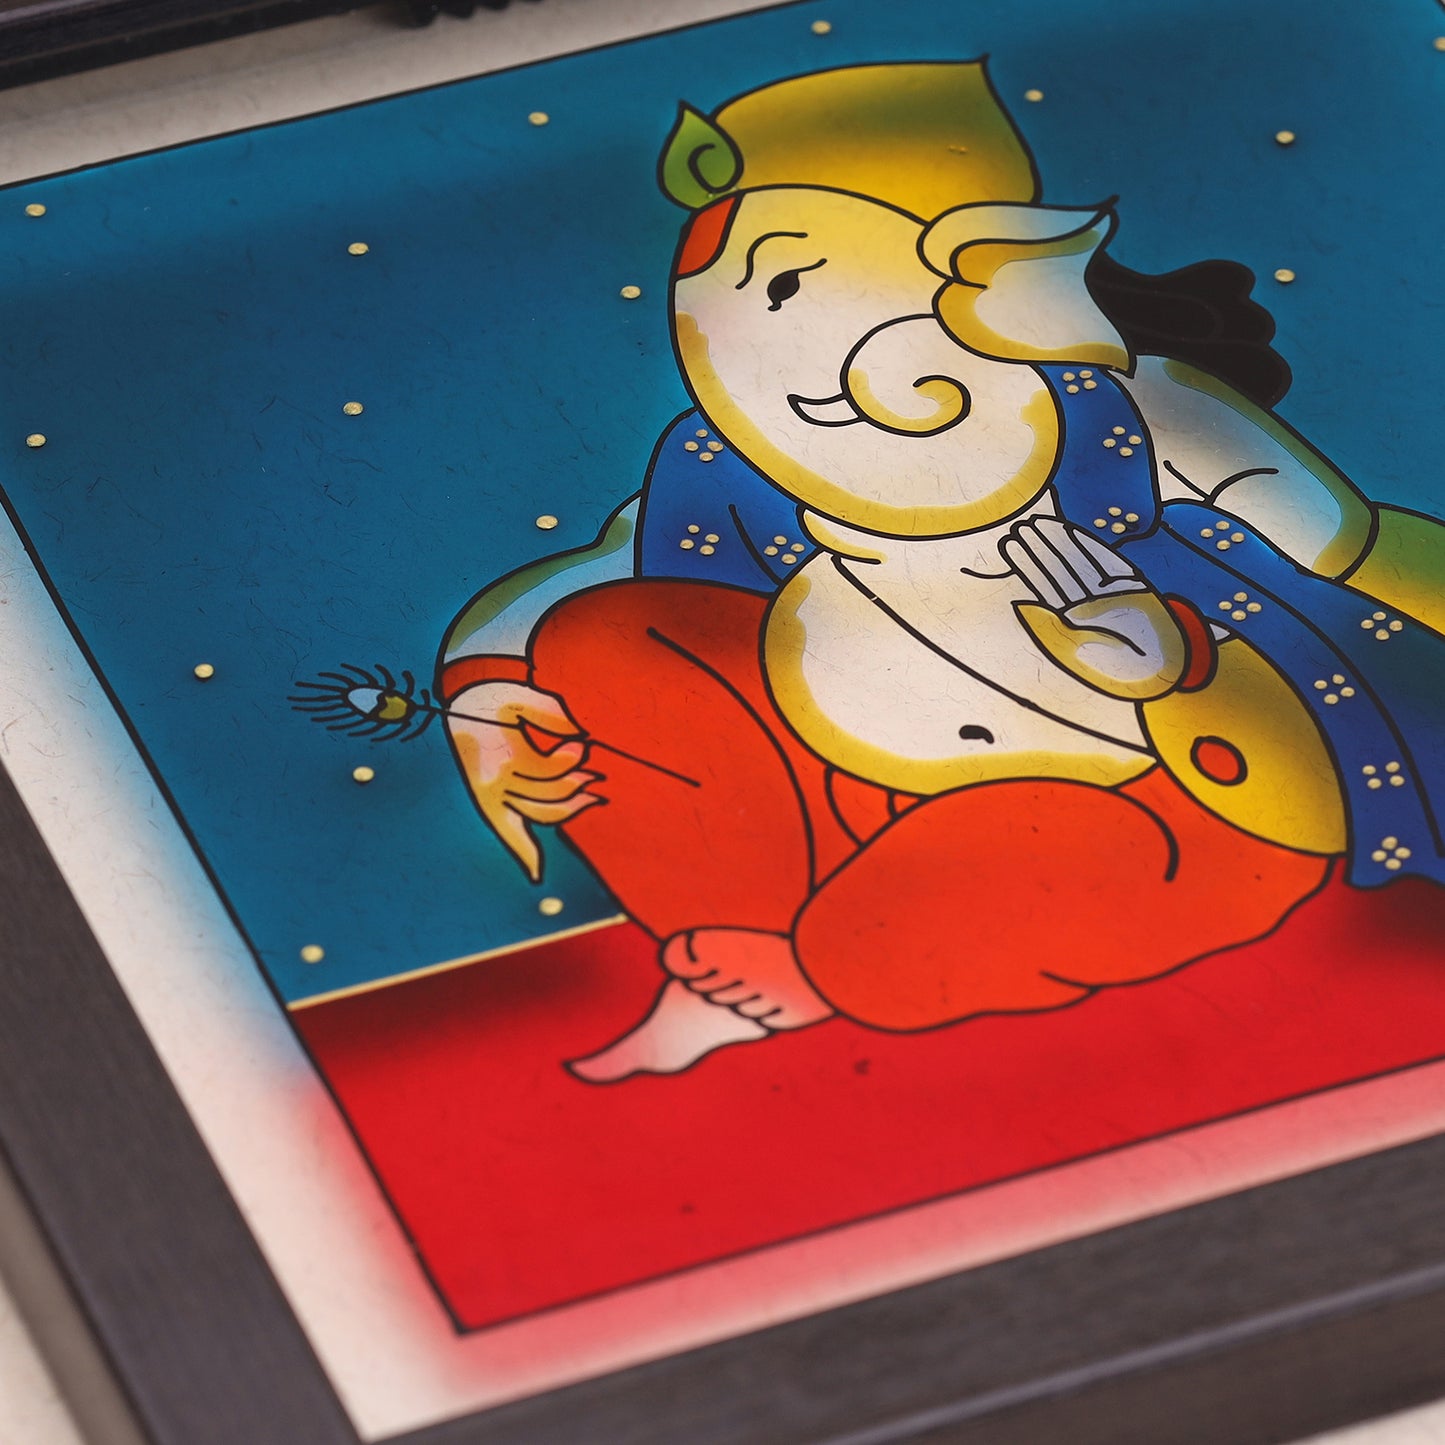 Ganesha-Stained Glass Painting Wall Art Frame